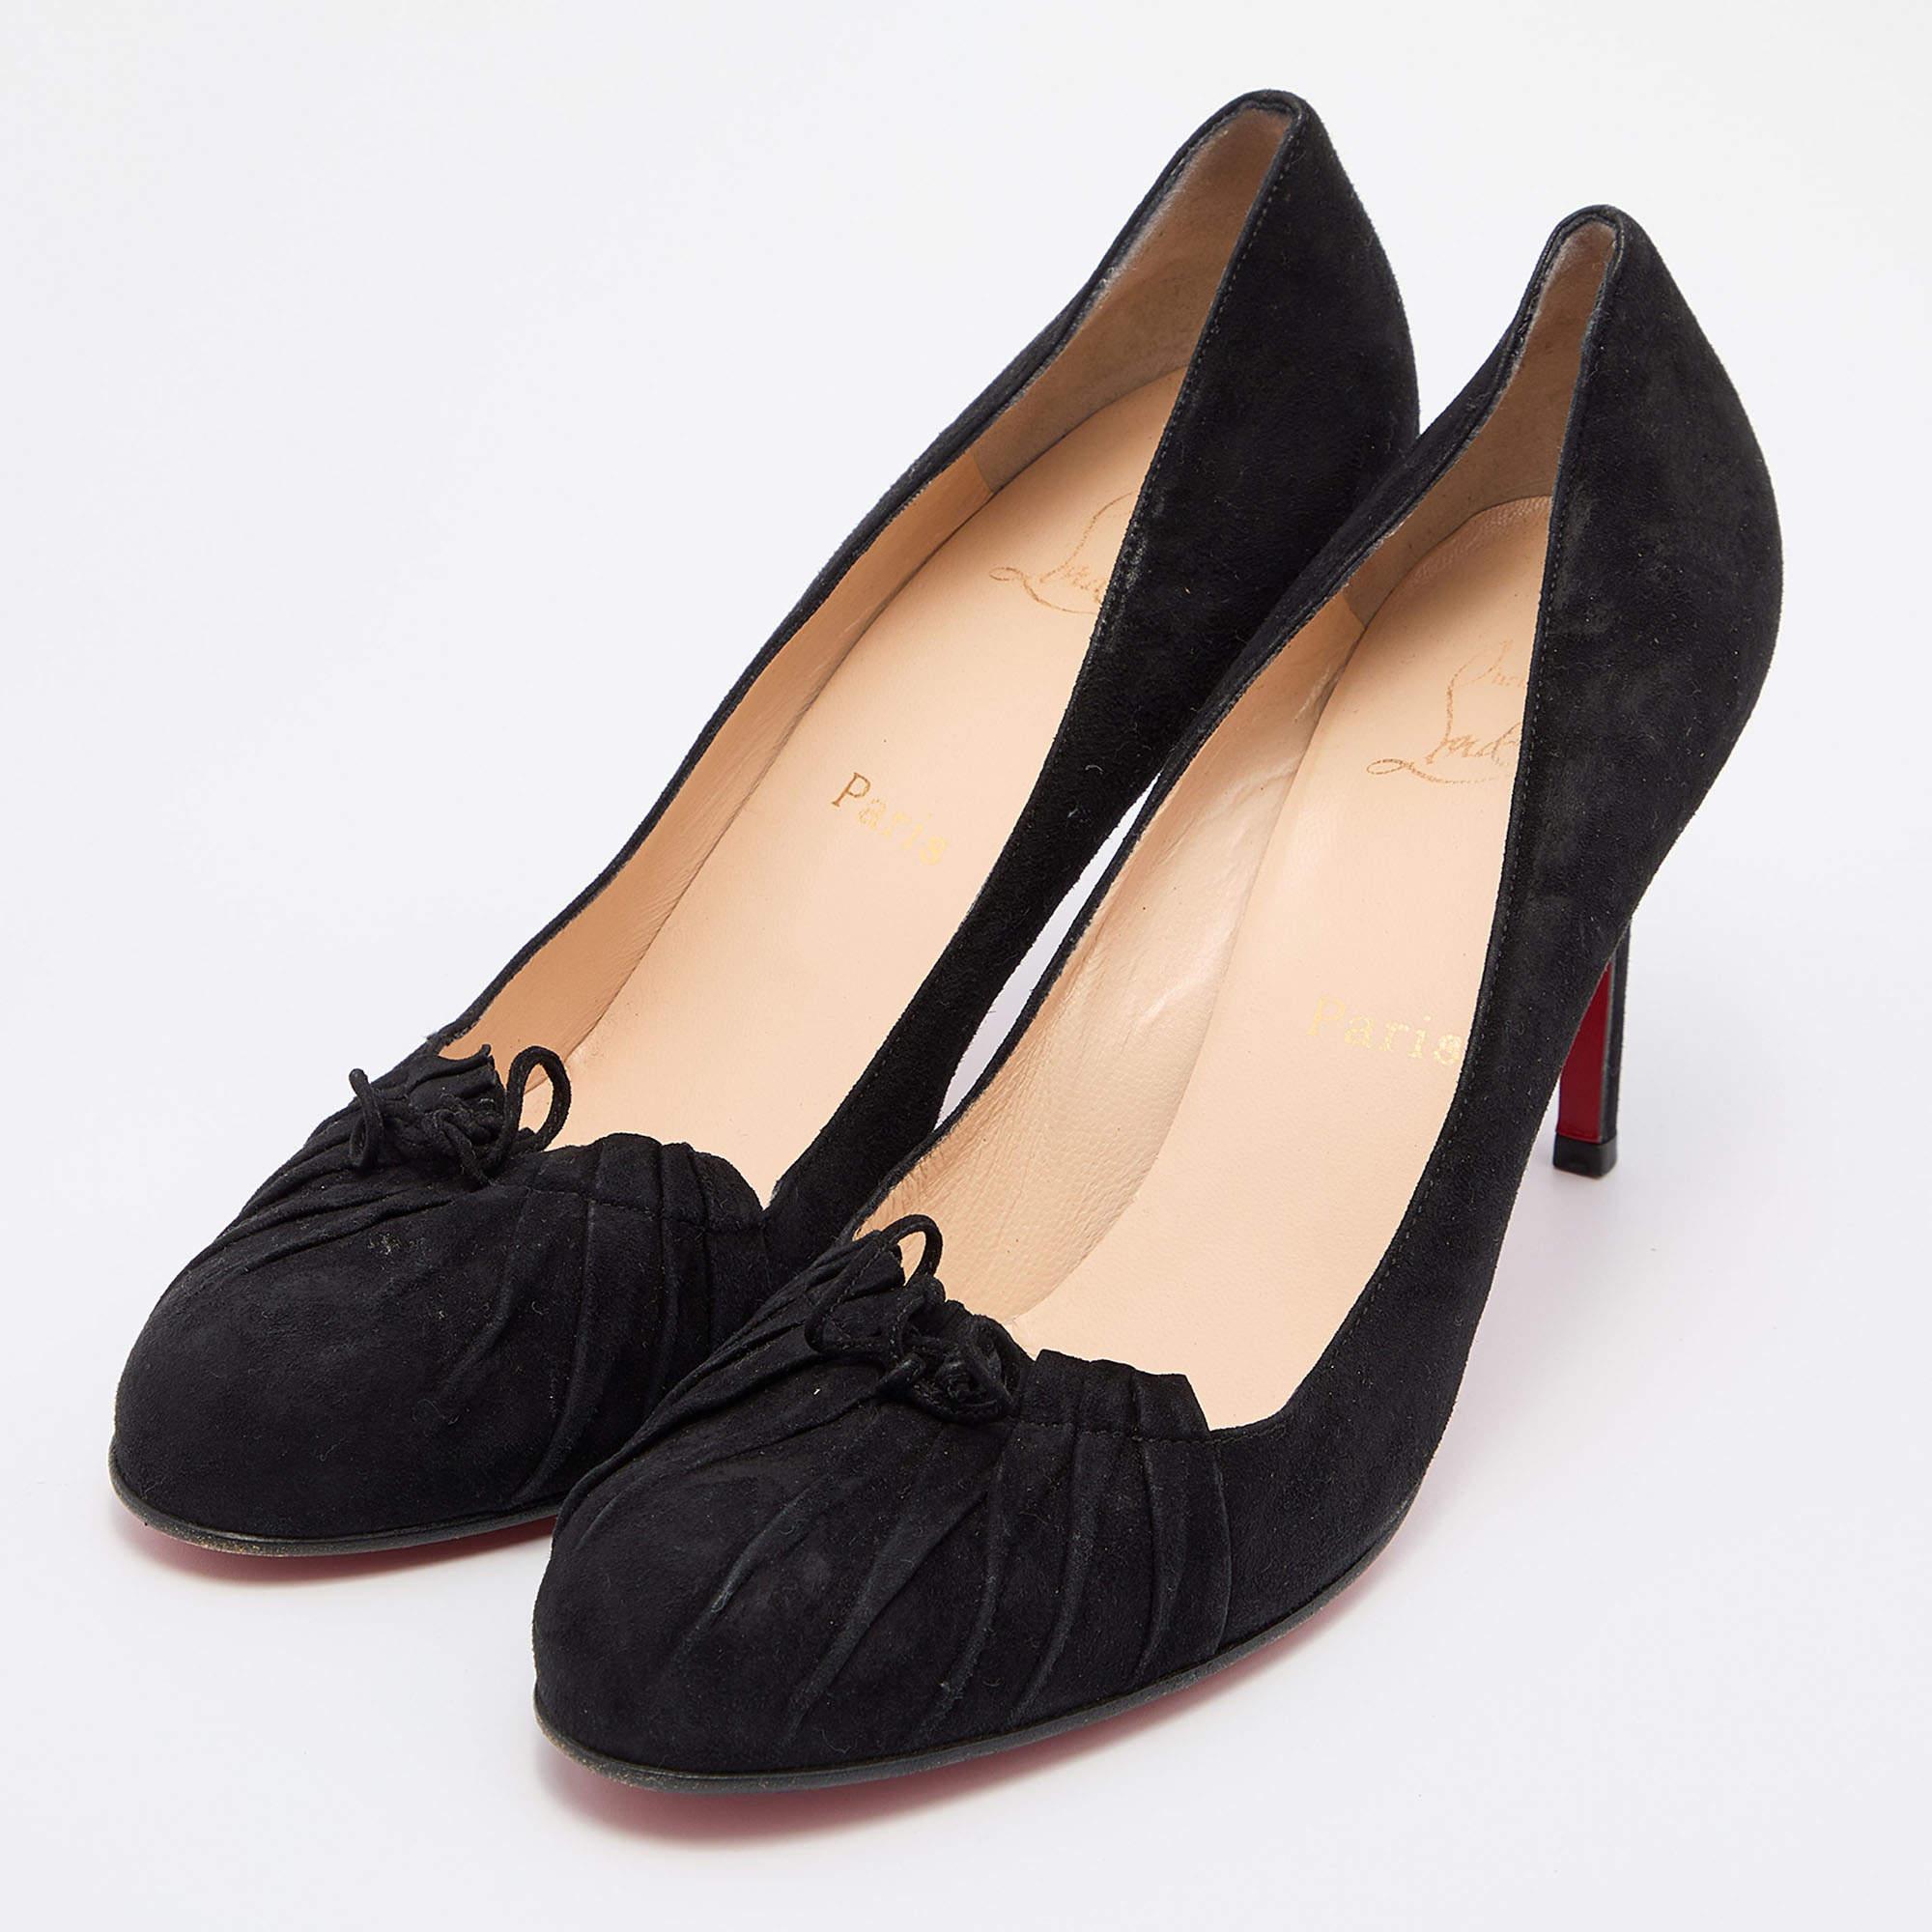 Women's Christian Louboutin Black Suede Bow Round Toe Pumps Size 41.5